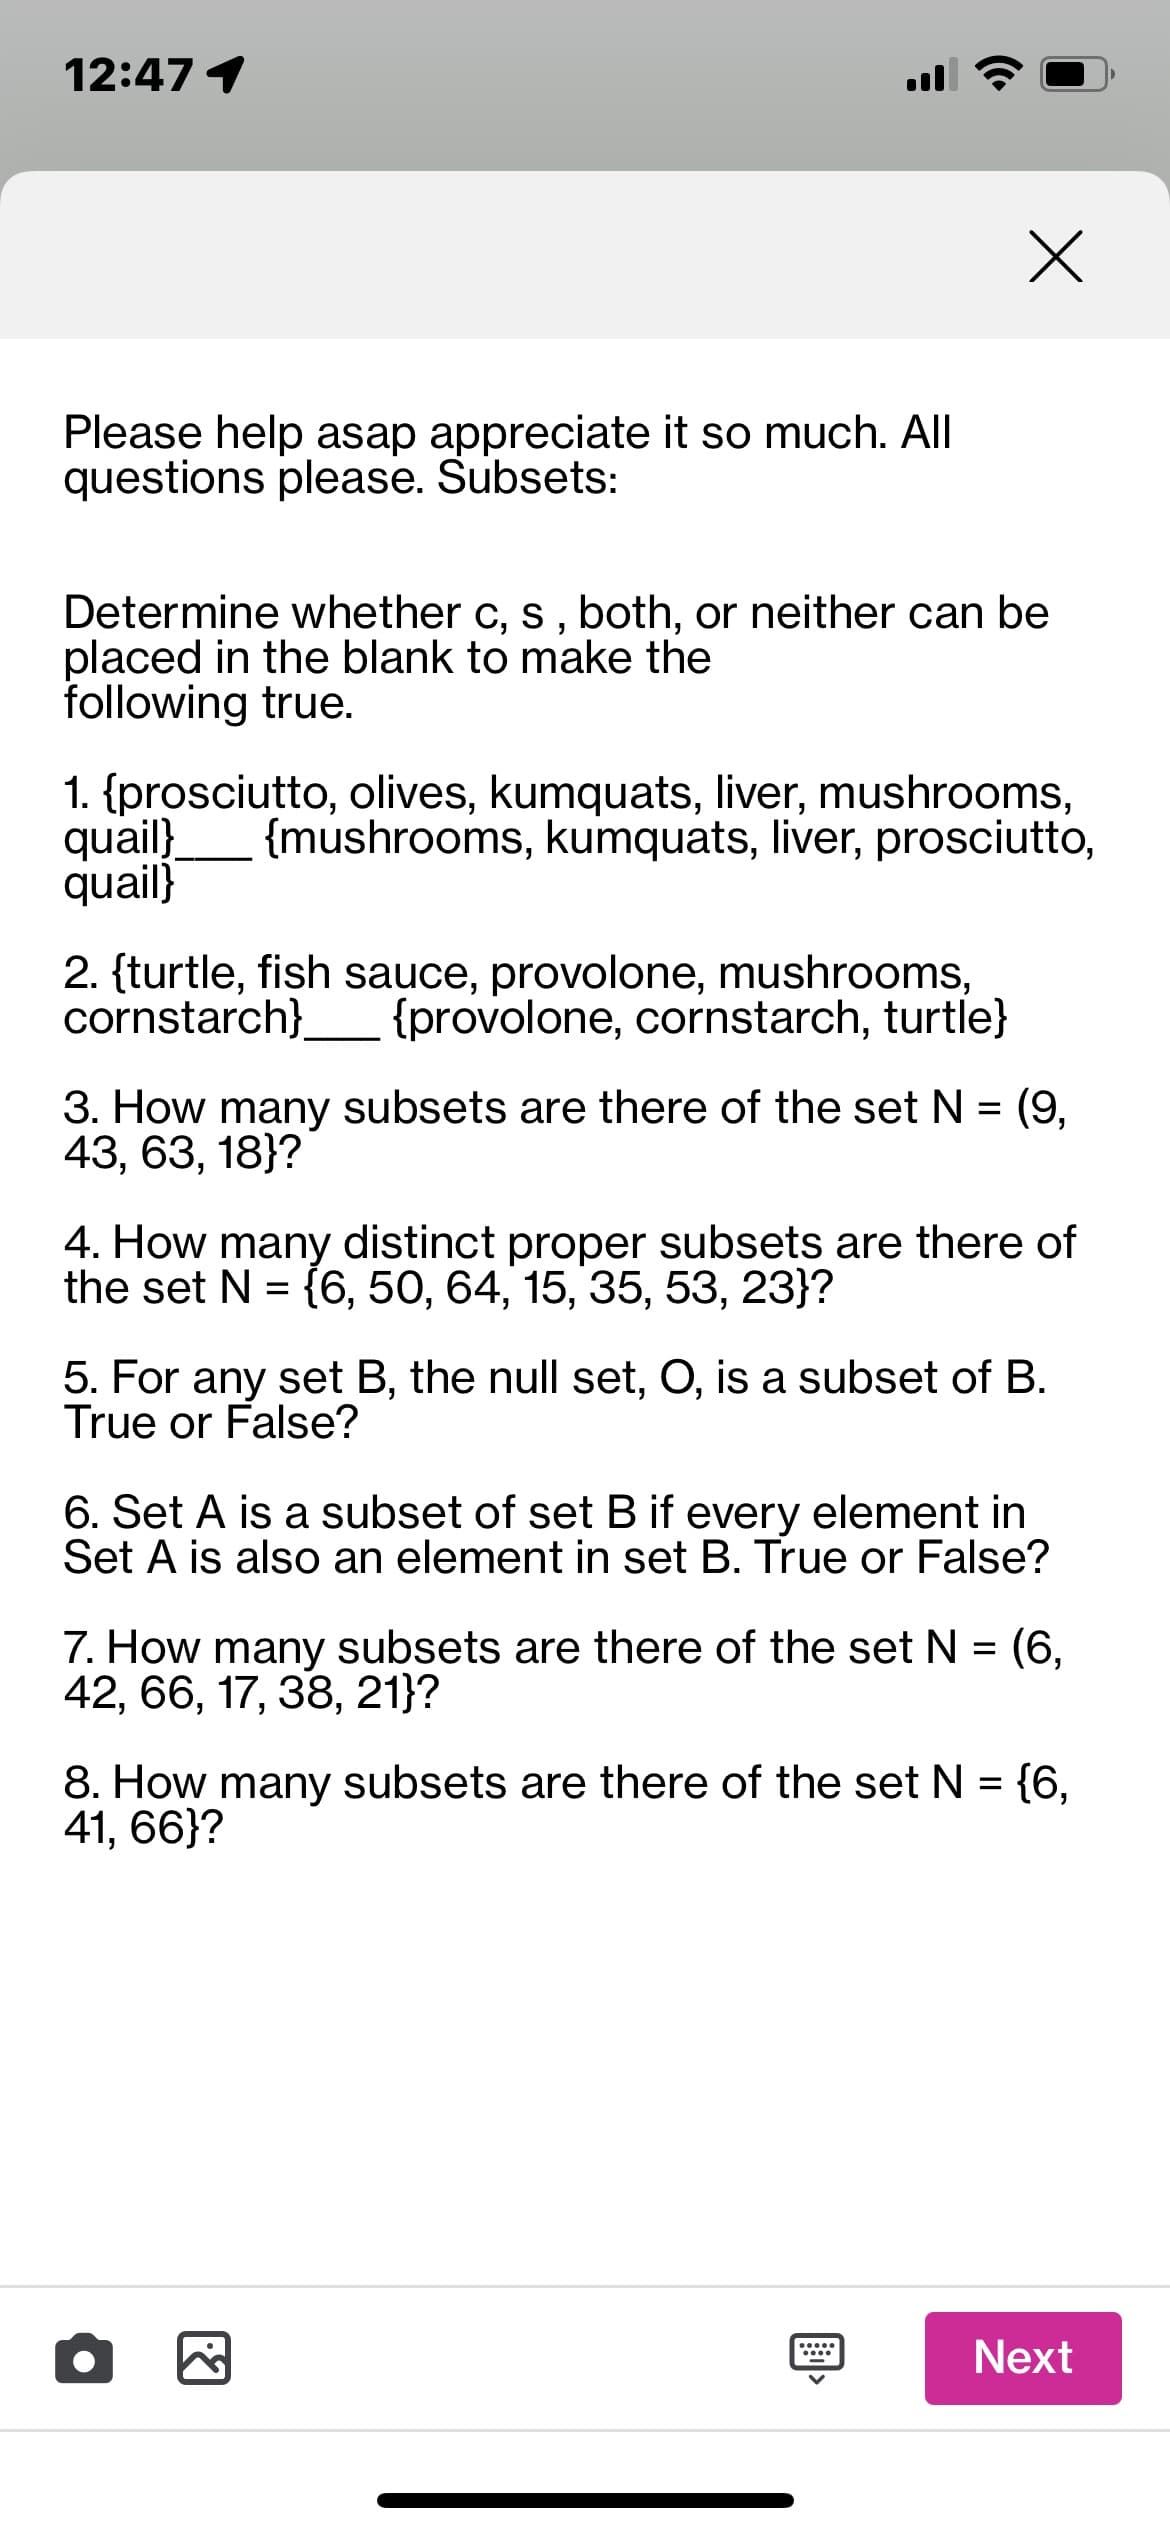 12:47 1
Please help asap appreciate it so much. All
questions please. Subsets:
Determine whether c, s, both, or neither can be
placed in the blank to make the
following true.
1. {prosciutto, olives, kumquats, liver, mushrooms,
quail} {mushrooms, kumquats, liver, prosciutto,
quail}
2. {turtle, fish sauce, provolone, mushrooms,
cornstarch} {provolone, cornstarch, turtle}
x
3. How many subsets are there of the set N = (9,
43, 63, 18}?
4. How many distinct proper subsets are there of
the set N = {6, 50, 64, 15, 35, 53, 23}?
5. For any set B, the null set, O, is a subset of B.
True or False?
6. Set A is a subset of set B if every element in
Set A is also an element in set B. True or False?
7. How many subsets are there of the set N = (6,
42, 66, 17, 38, 21}?
8. How many subsets are there of the set N = {6,
41, 66}?
•
F
Next